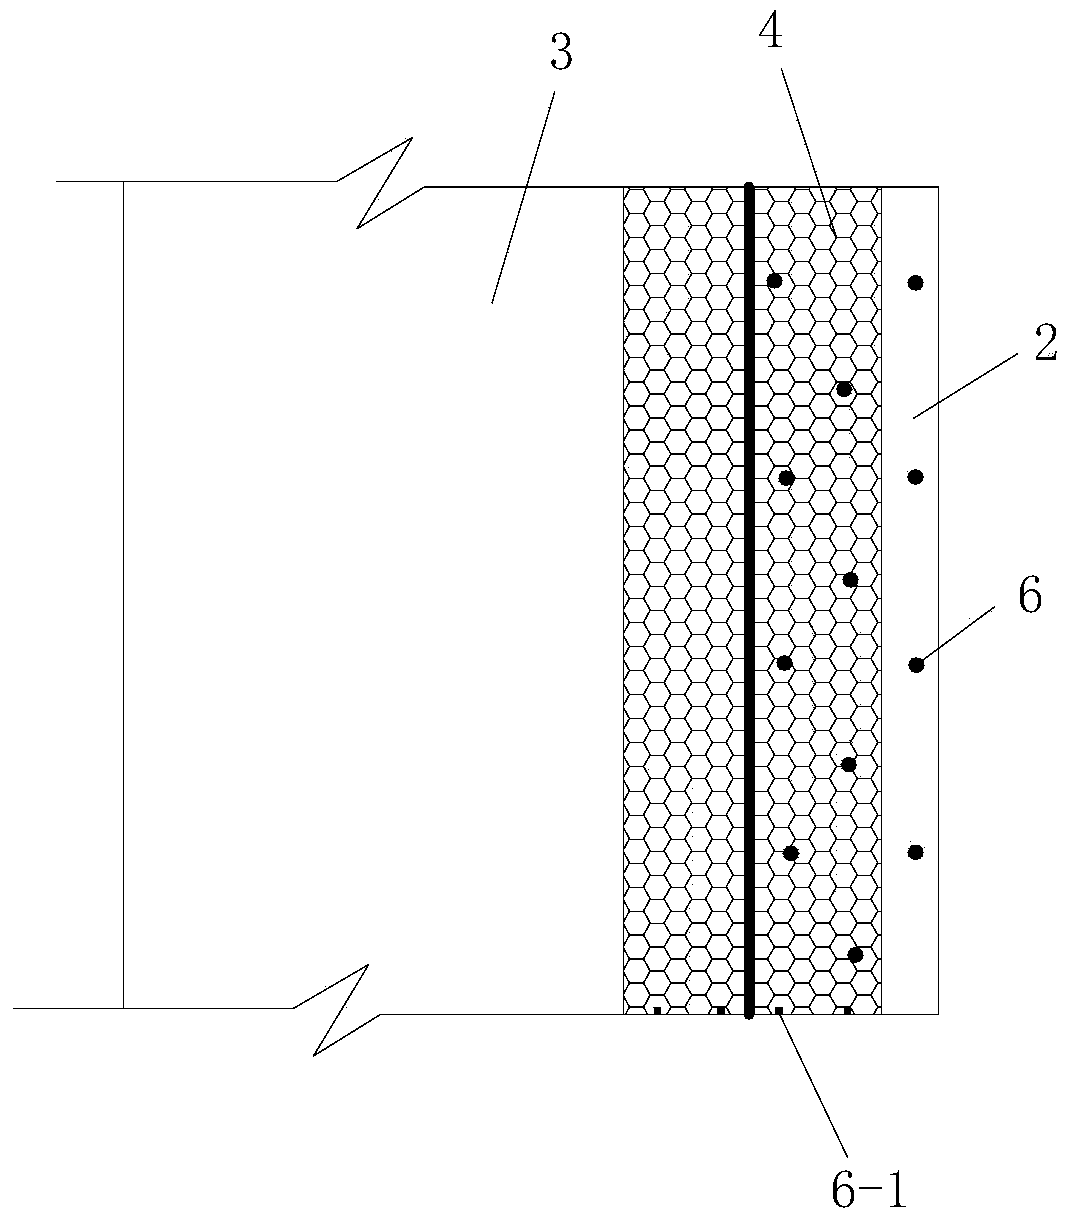 Foundation treatment method of collapsible loess slope cut-and-fill joint part